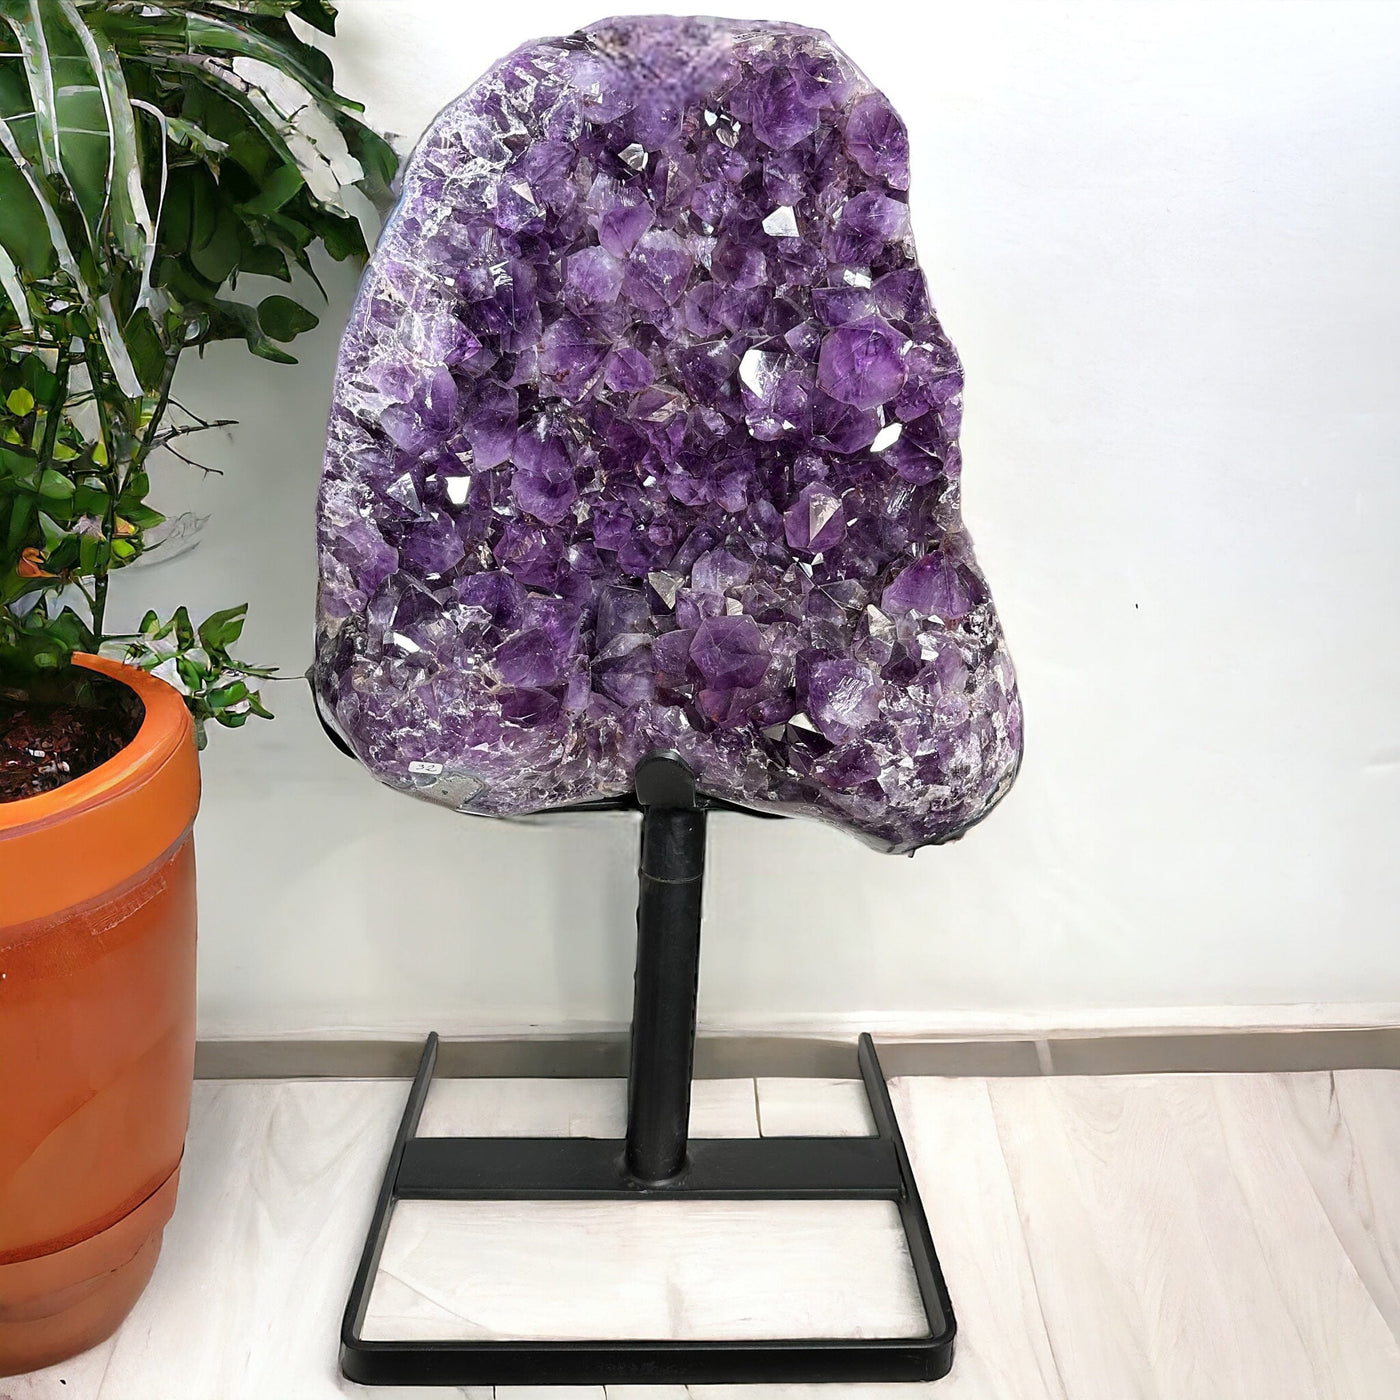 Amethyst Cluster on Rotating Metal Stand - Over 79pounds!